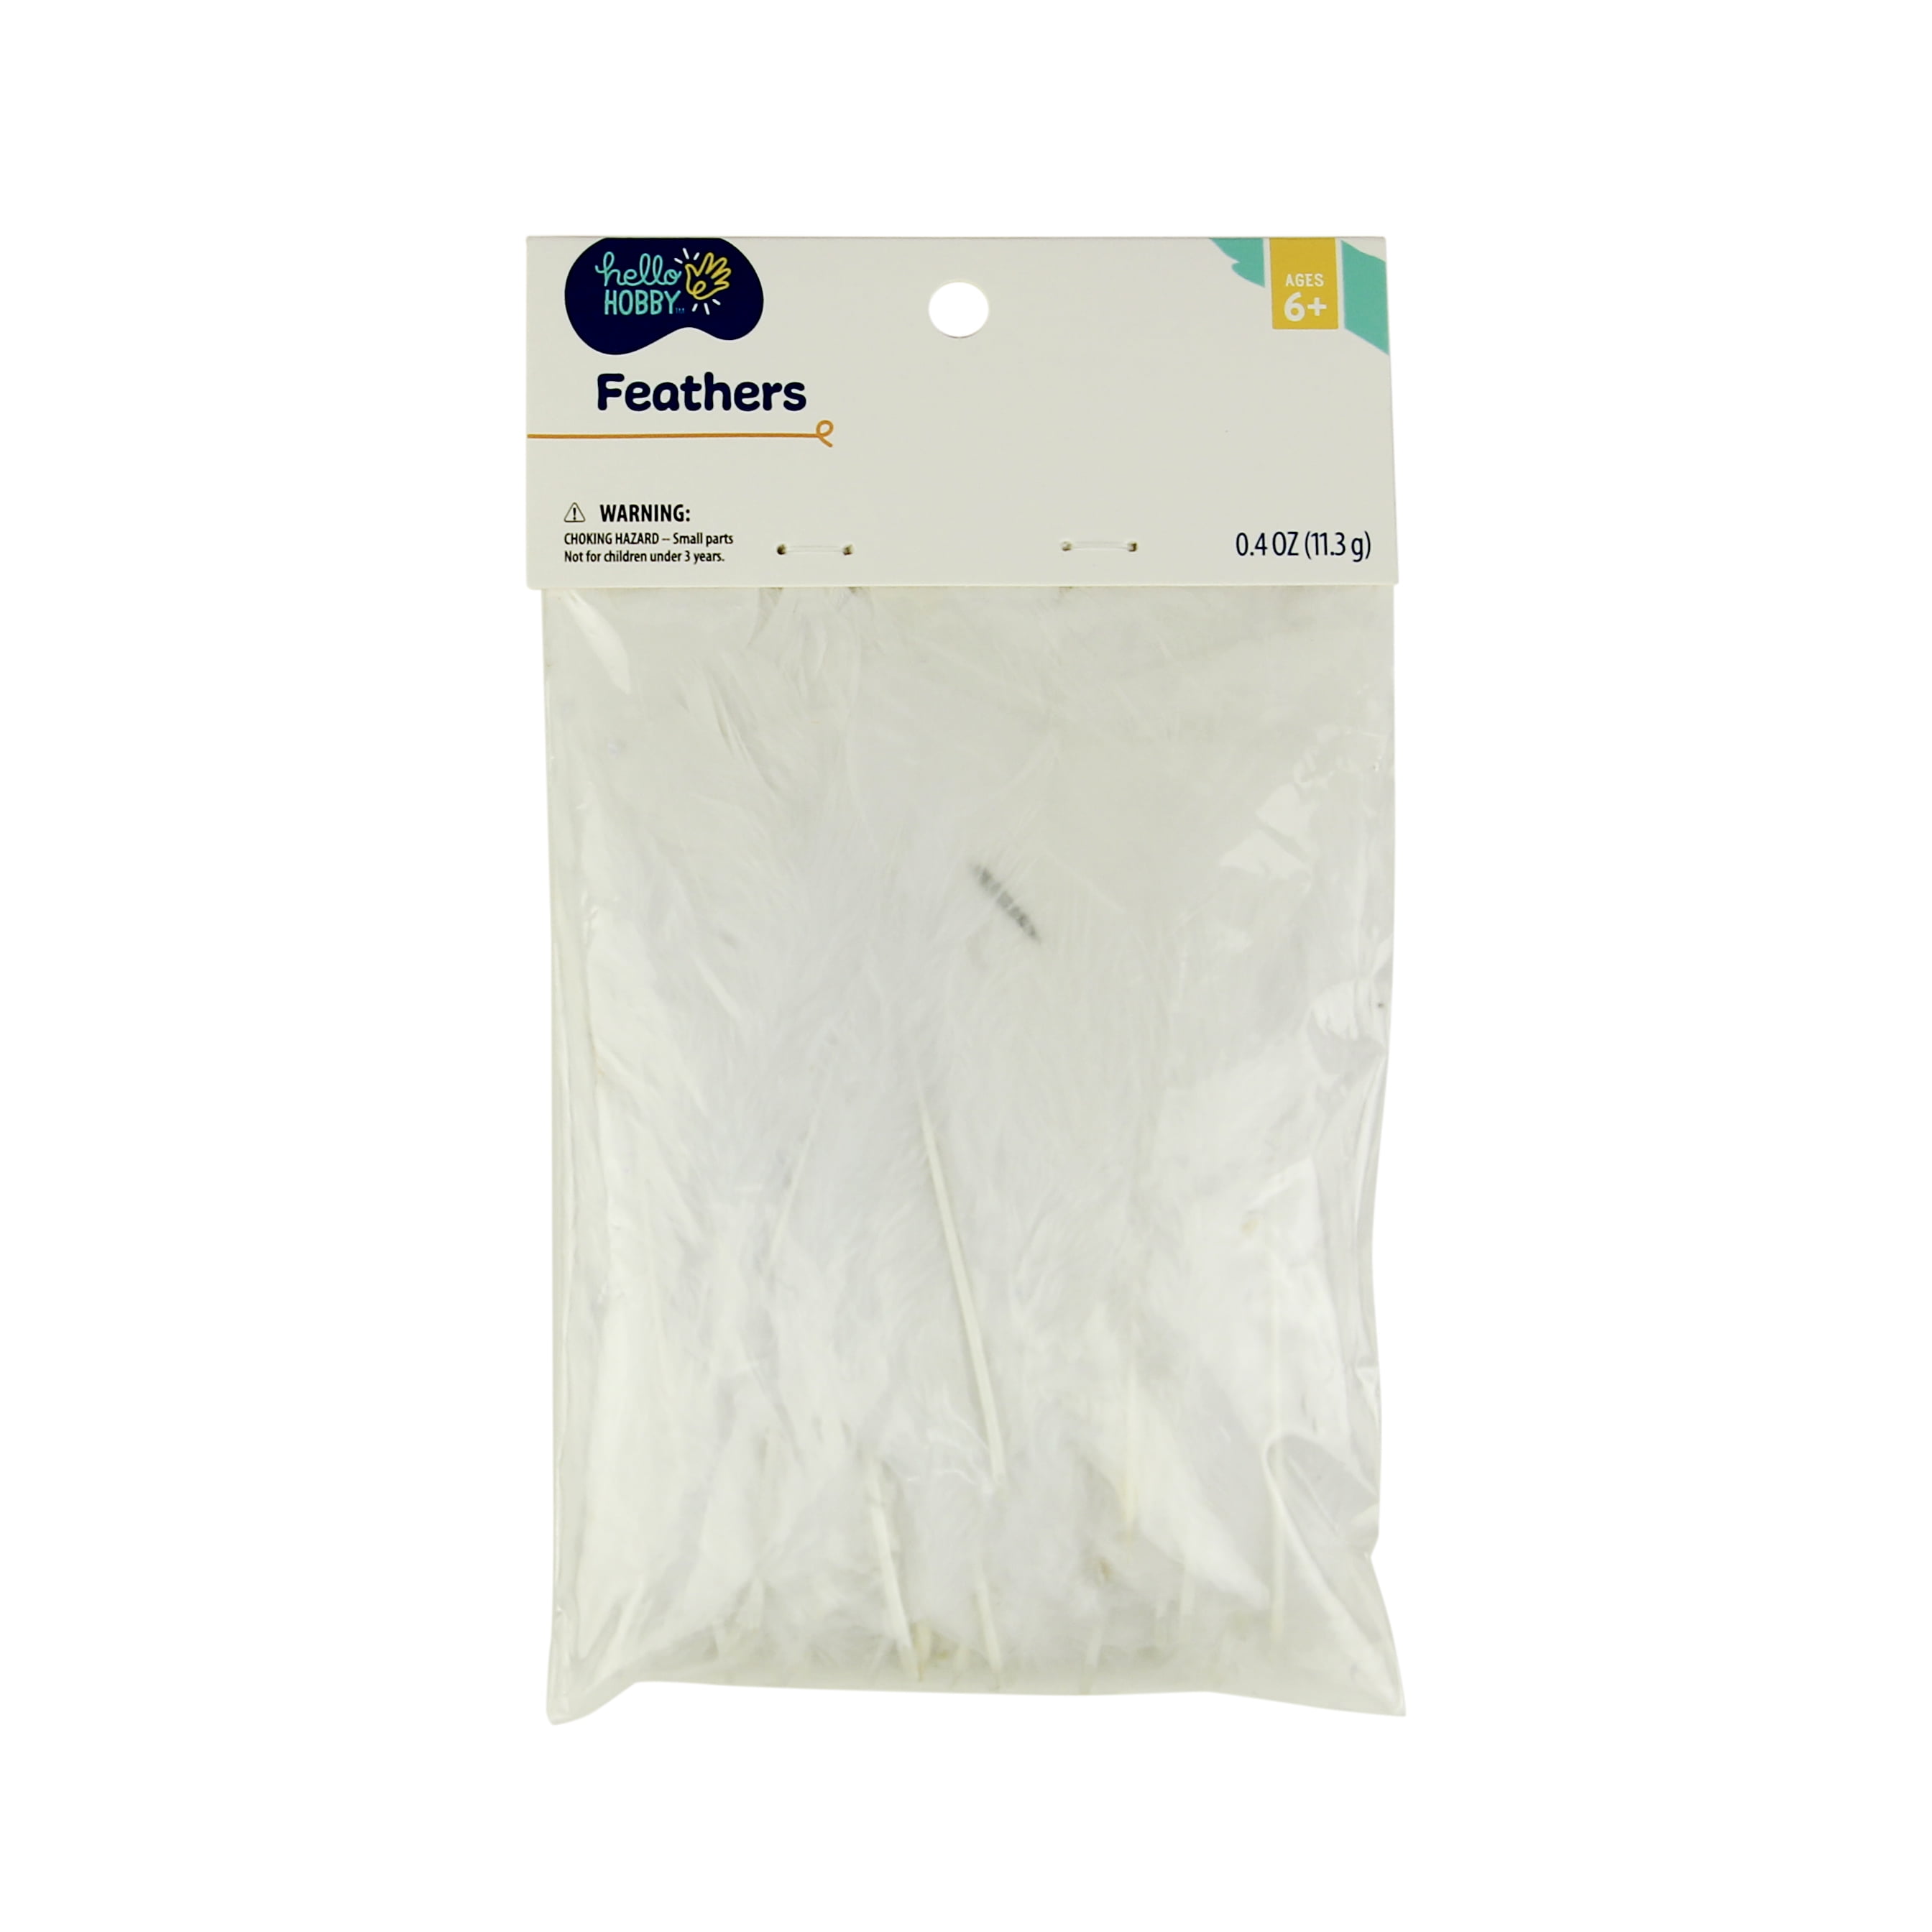 Baker Ross ET325 White Feathers - Bag of 20g, for Kids to Decorate, Arts and Crafts